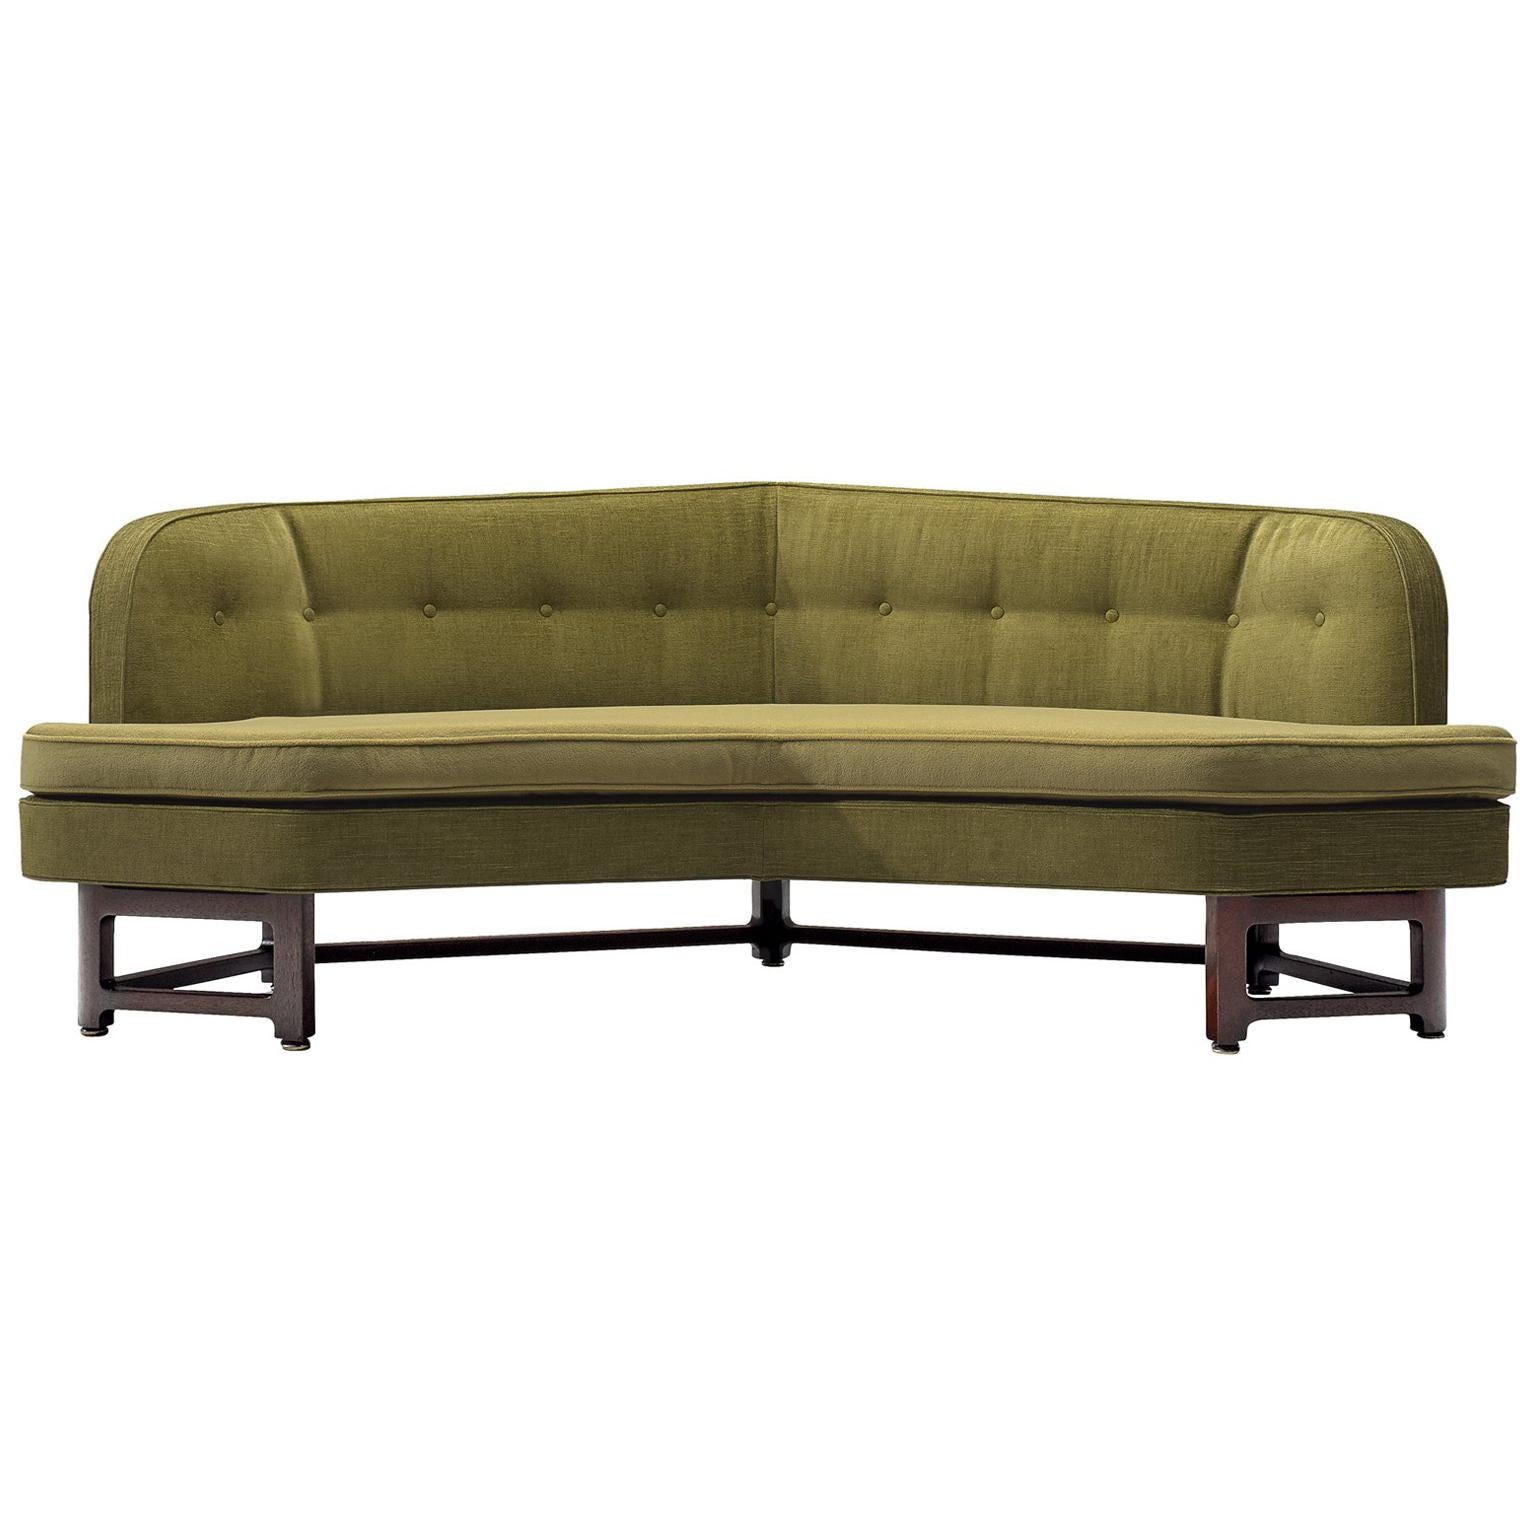 Edward Wormley Reupholstered 'Janus' Sofa with Green Upholstery